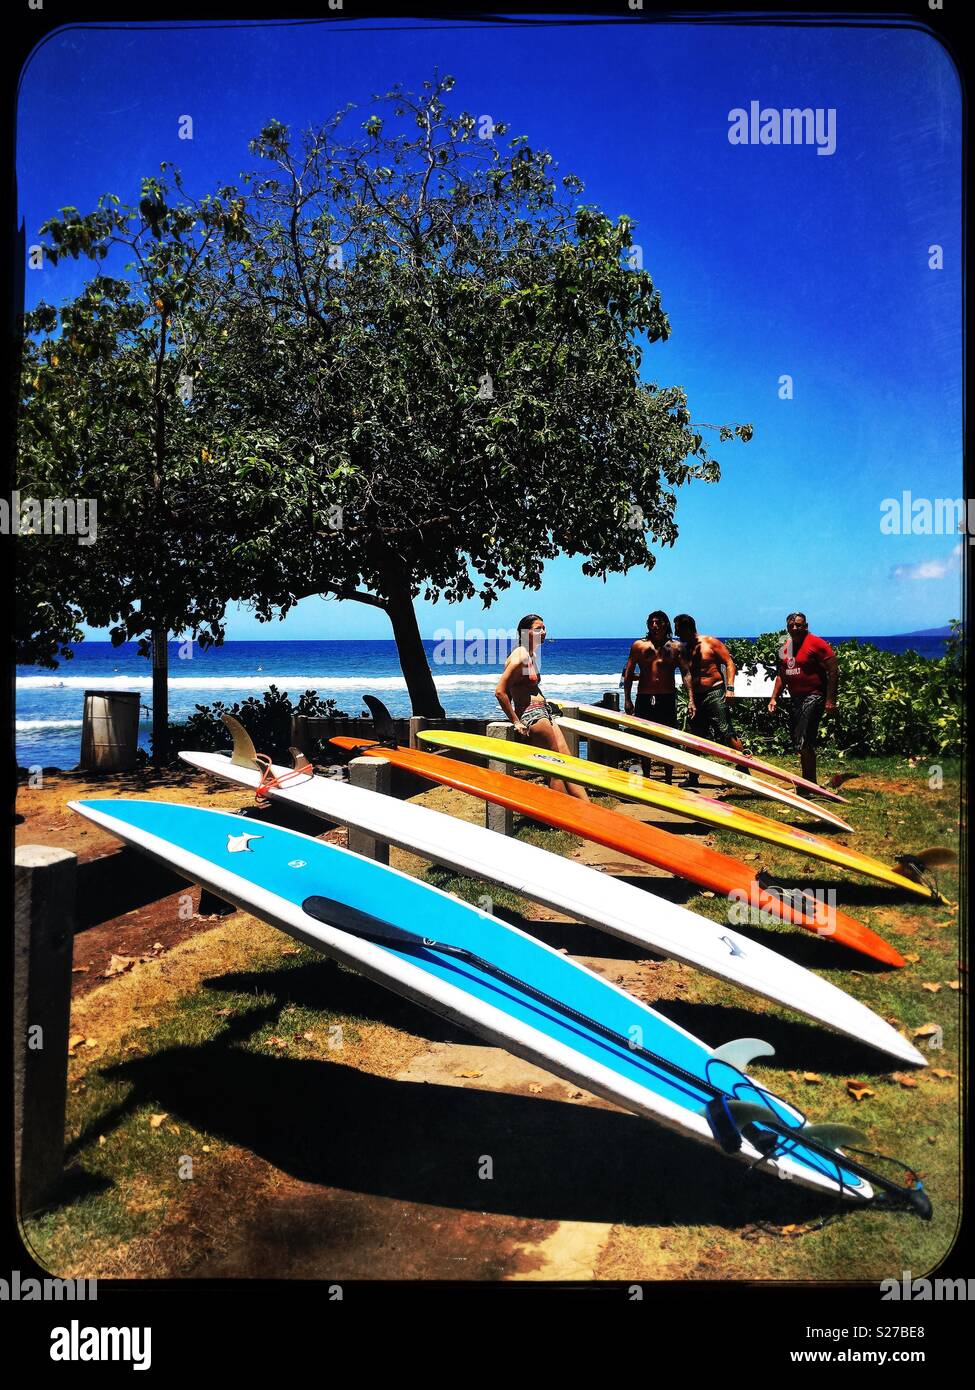 Break time after hours of fun endless morning surf, summer swells in Maui, the beach parks and surf breaks are full of colorful surfboards , beautiful friends and laughter! Feeling so grateful!!! Stock Photo